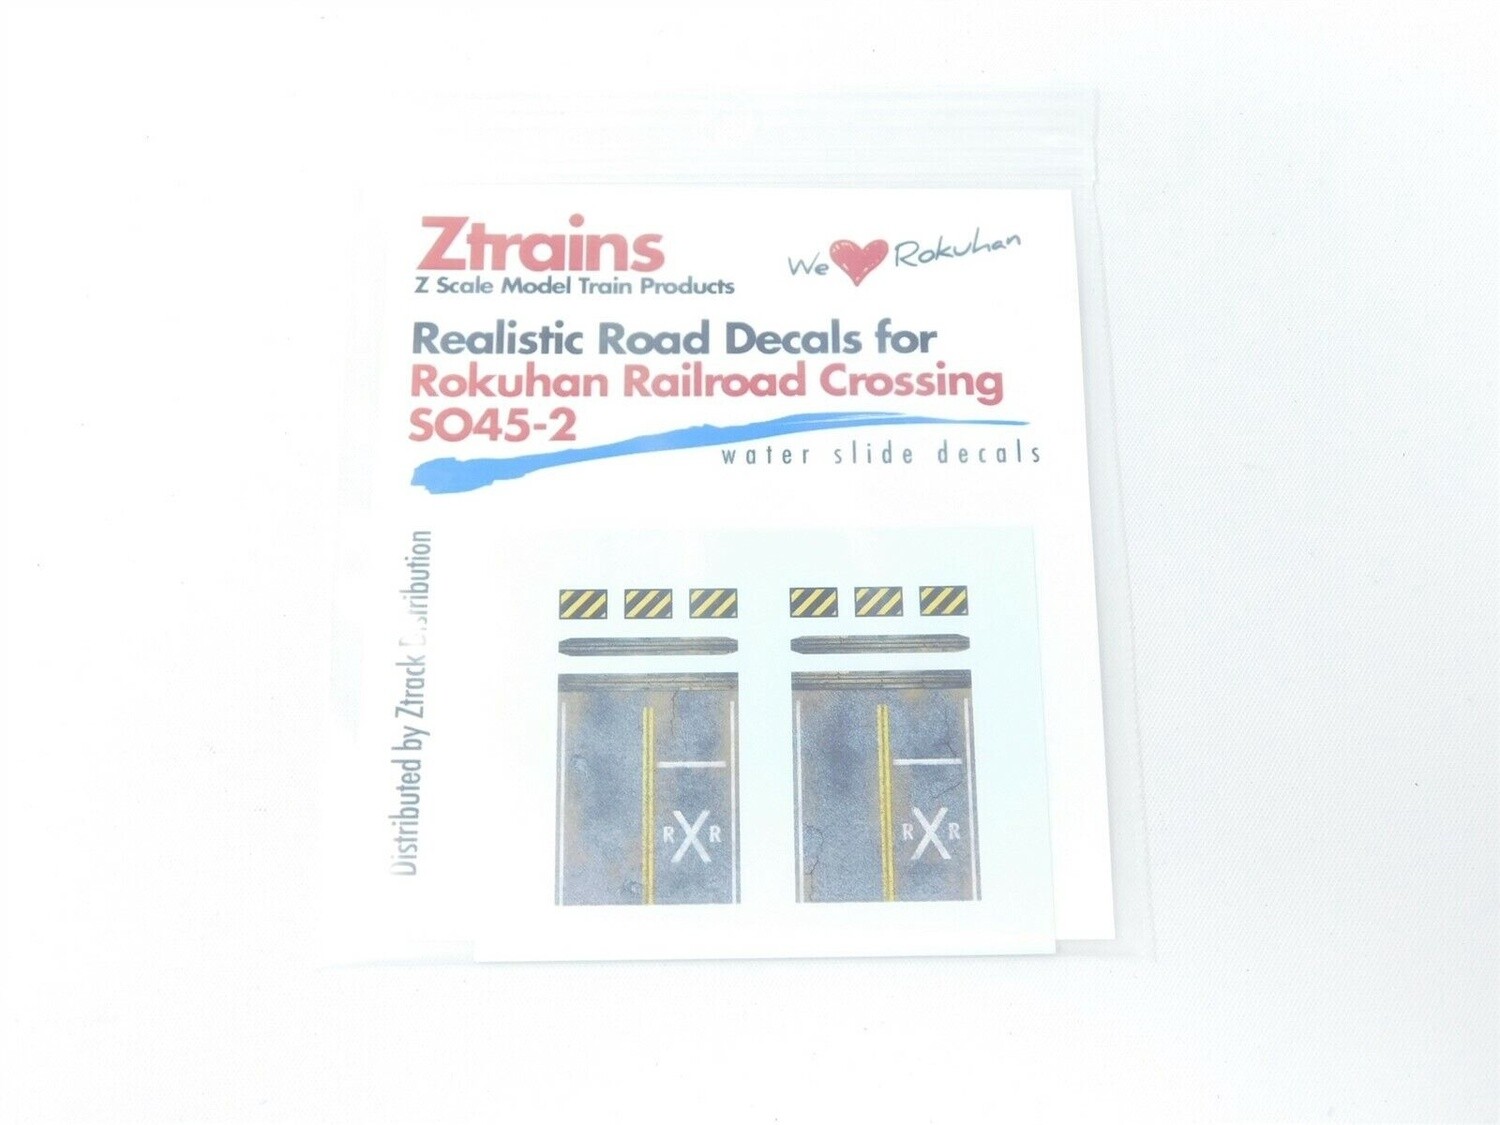 Ztrains ZTR-300 Z Realistic Road Decals for S045-2 Rokuhan Railroad Crossing